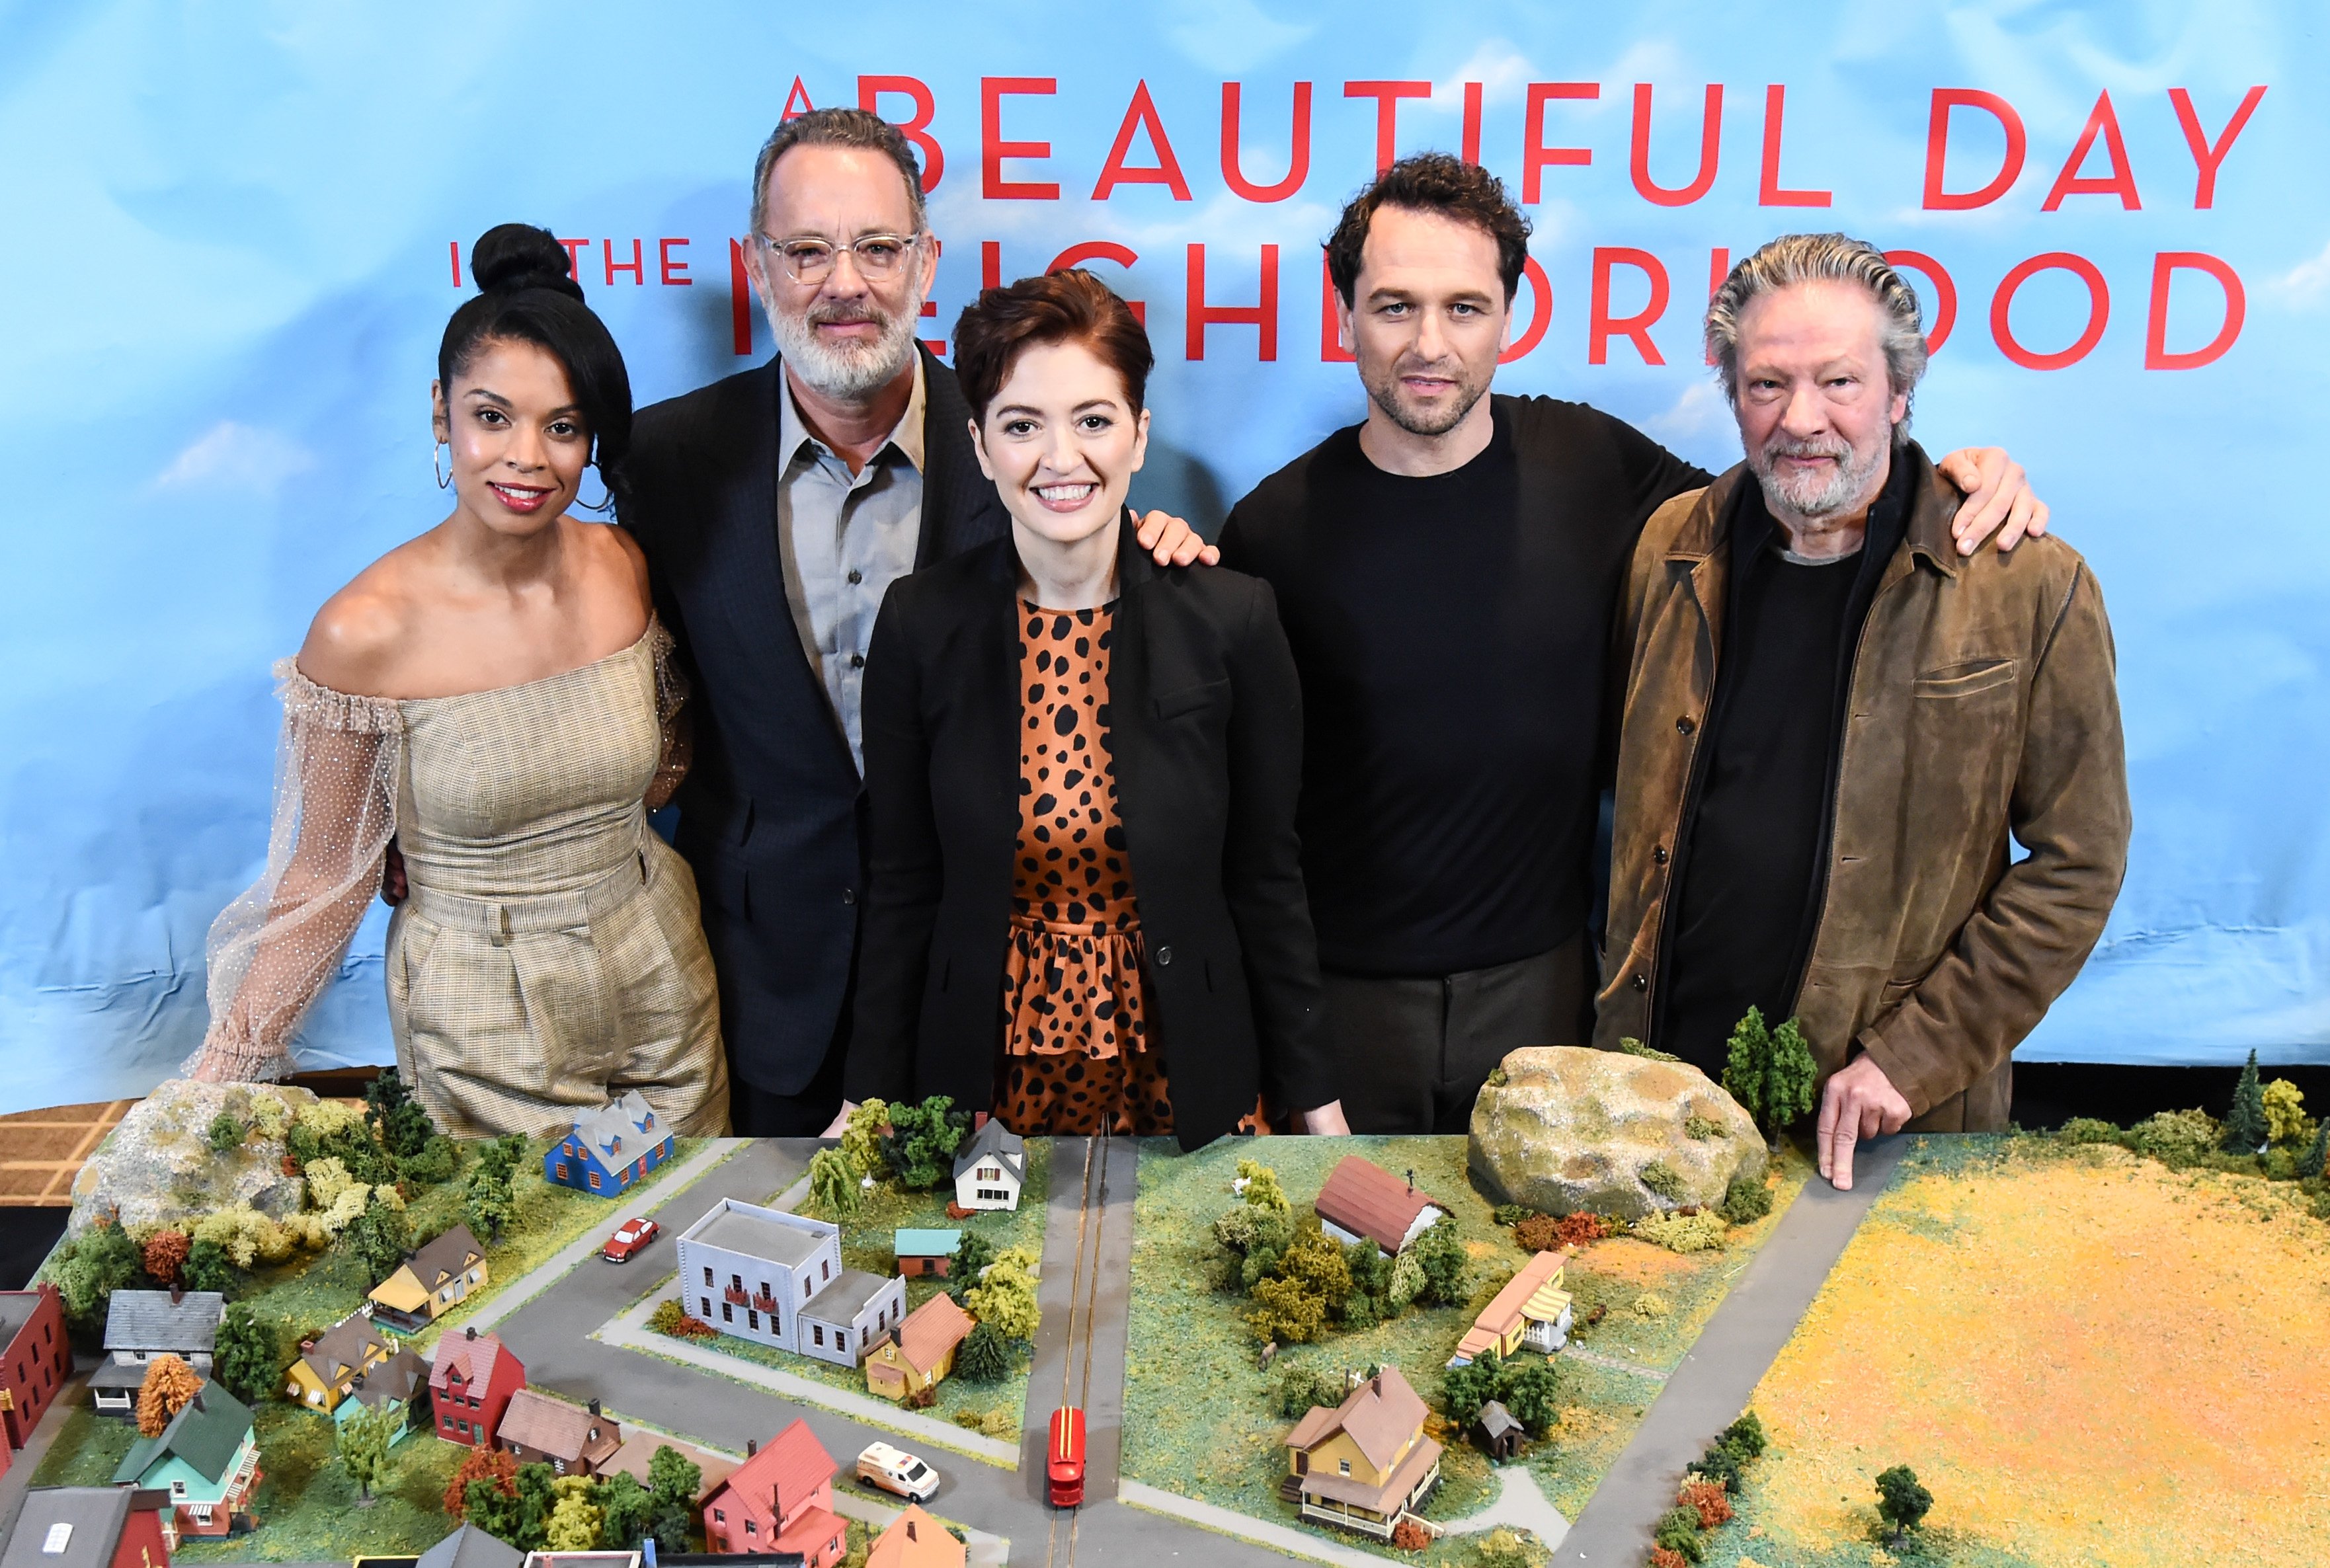 Susan Kelechi Watson, Tom Hanks, Marielle Heller, Matthew Rhys and Chris Cooper attend the Photo Call for "A Beautiful Day in the Neighborhood" at Four Seasons Hotel New York Downtown on November 17, 2019, in New York City. | Source: Getty Images.